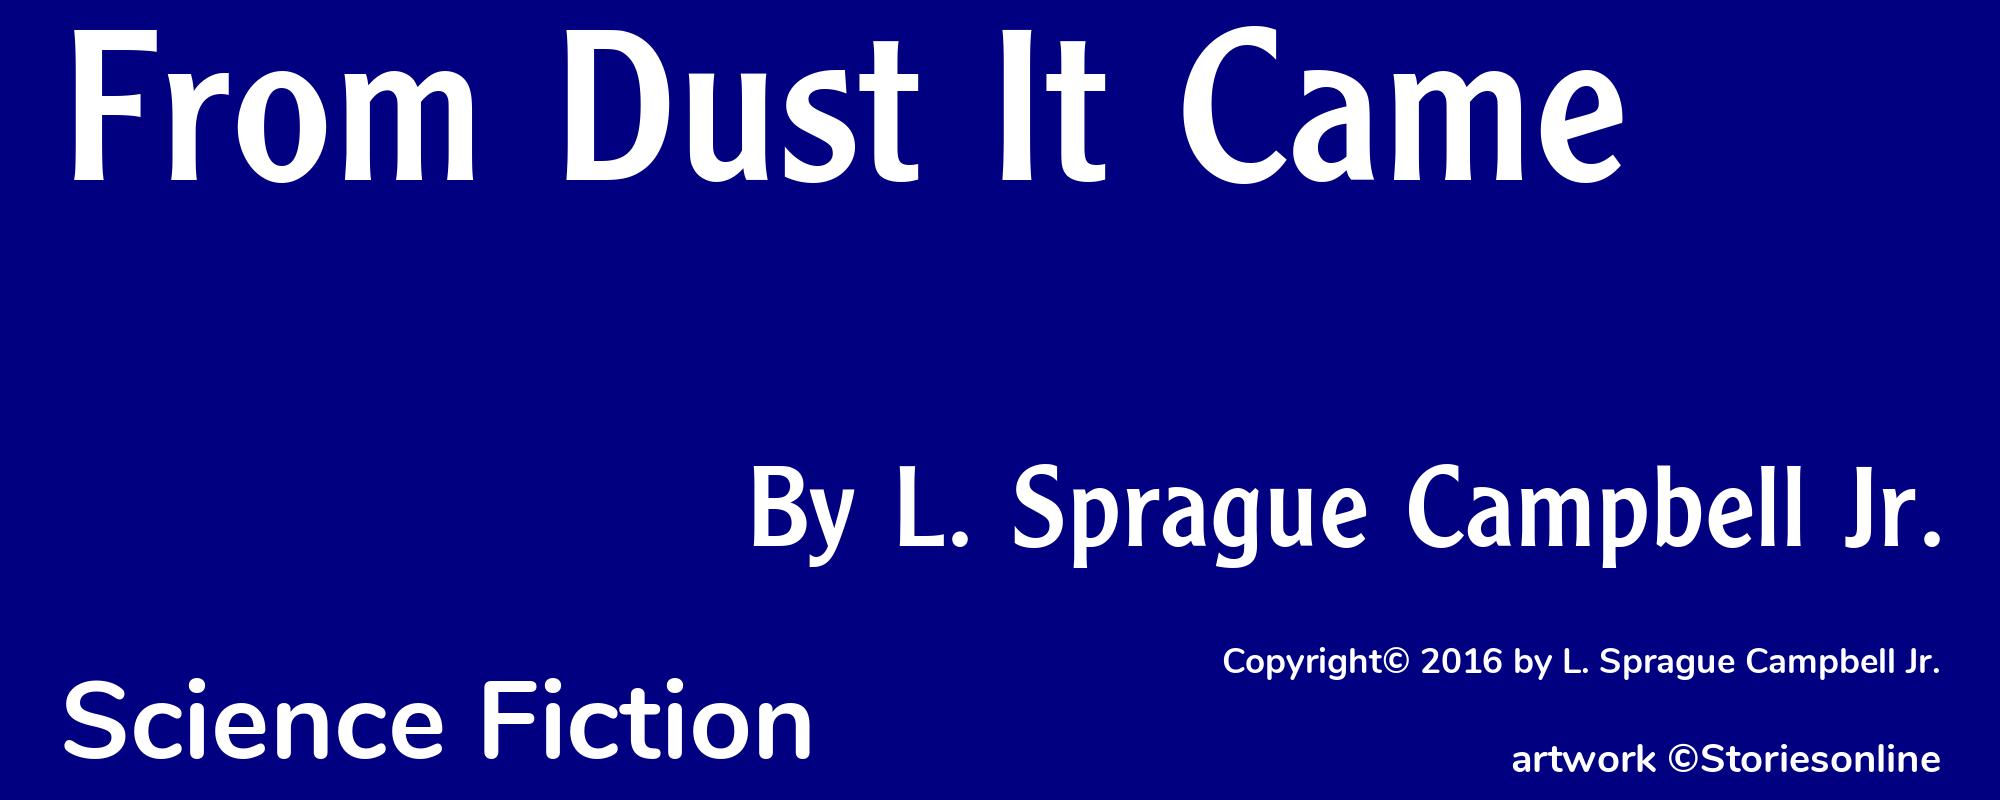 From Dust It Came - Cover